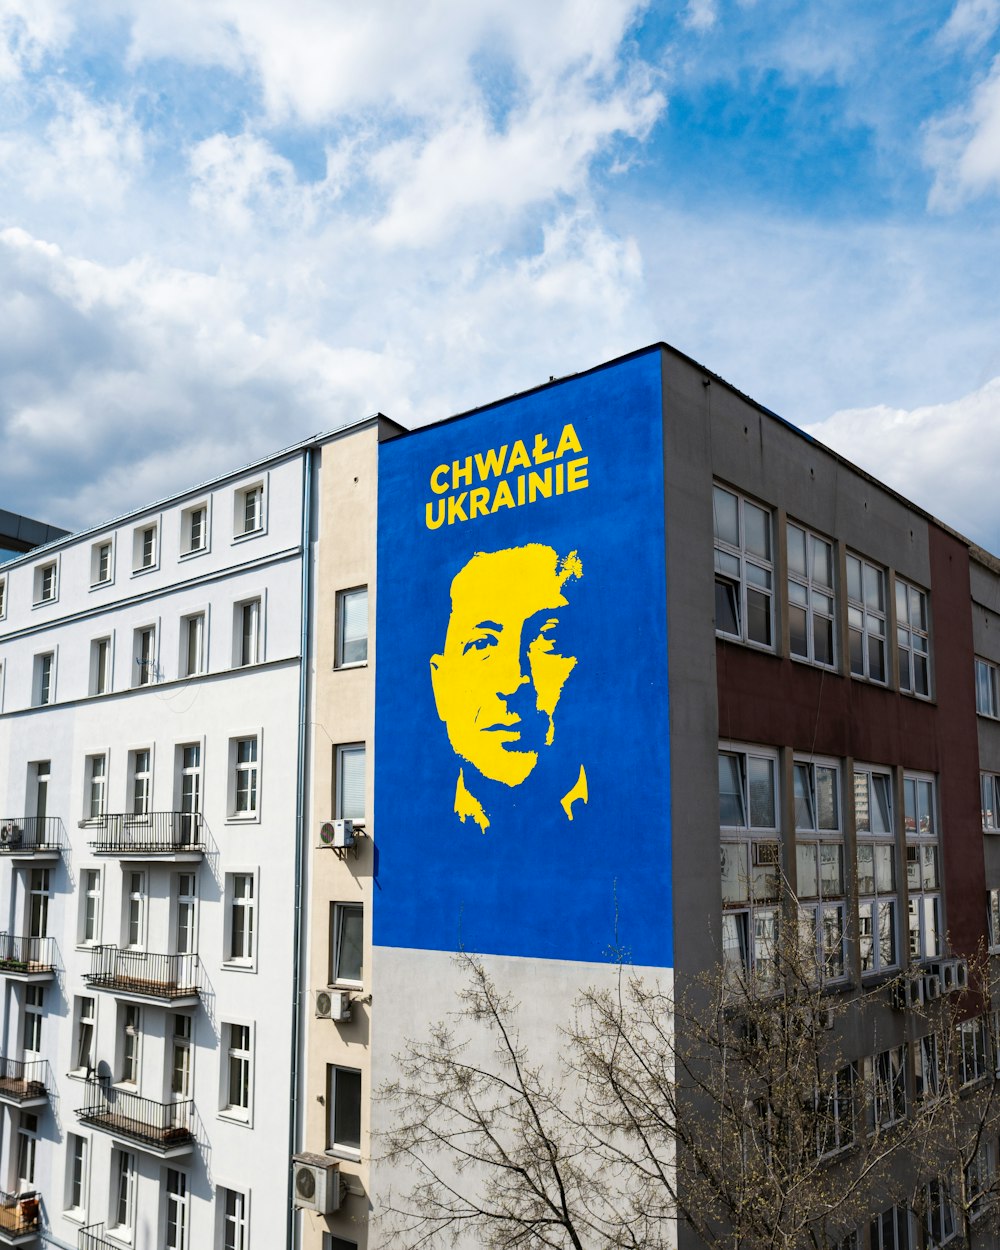 a building with a blue and yellow mural of a man's face